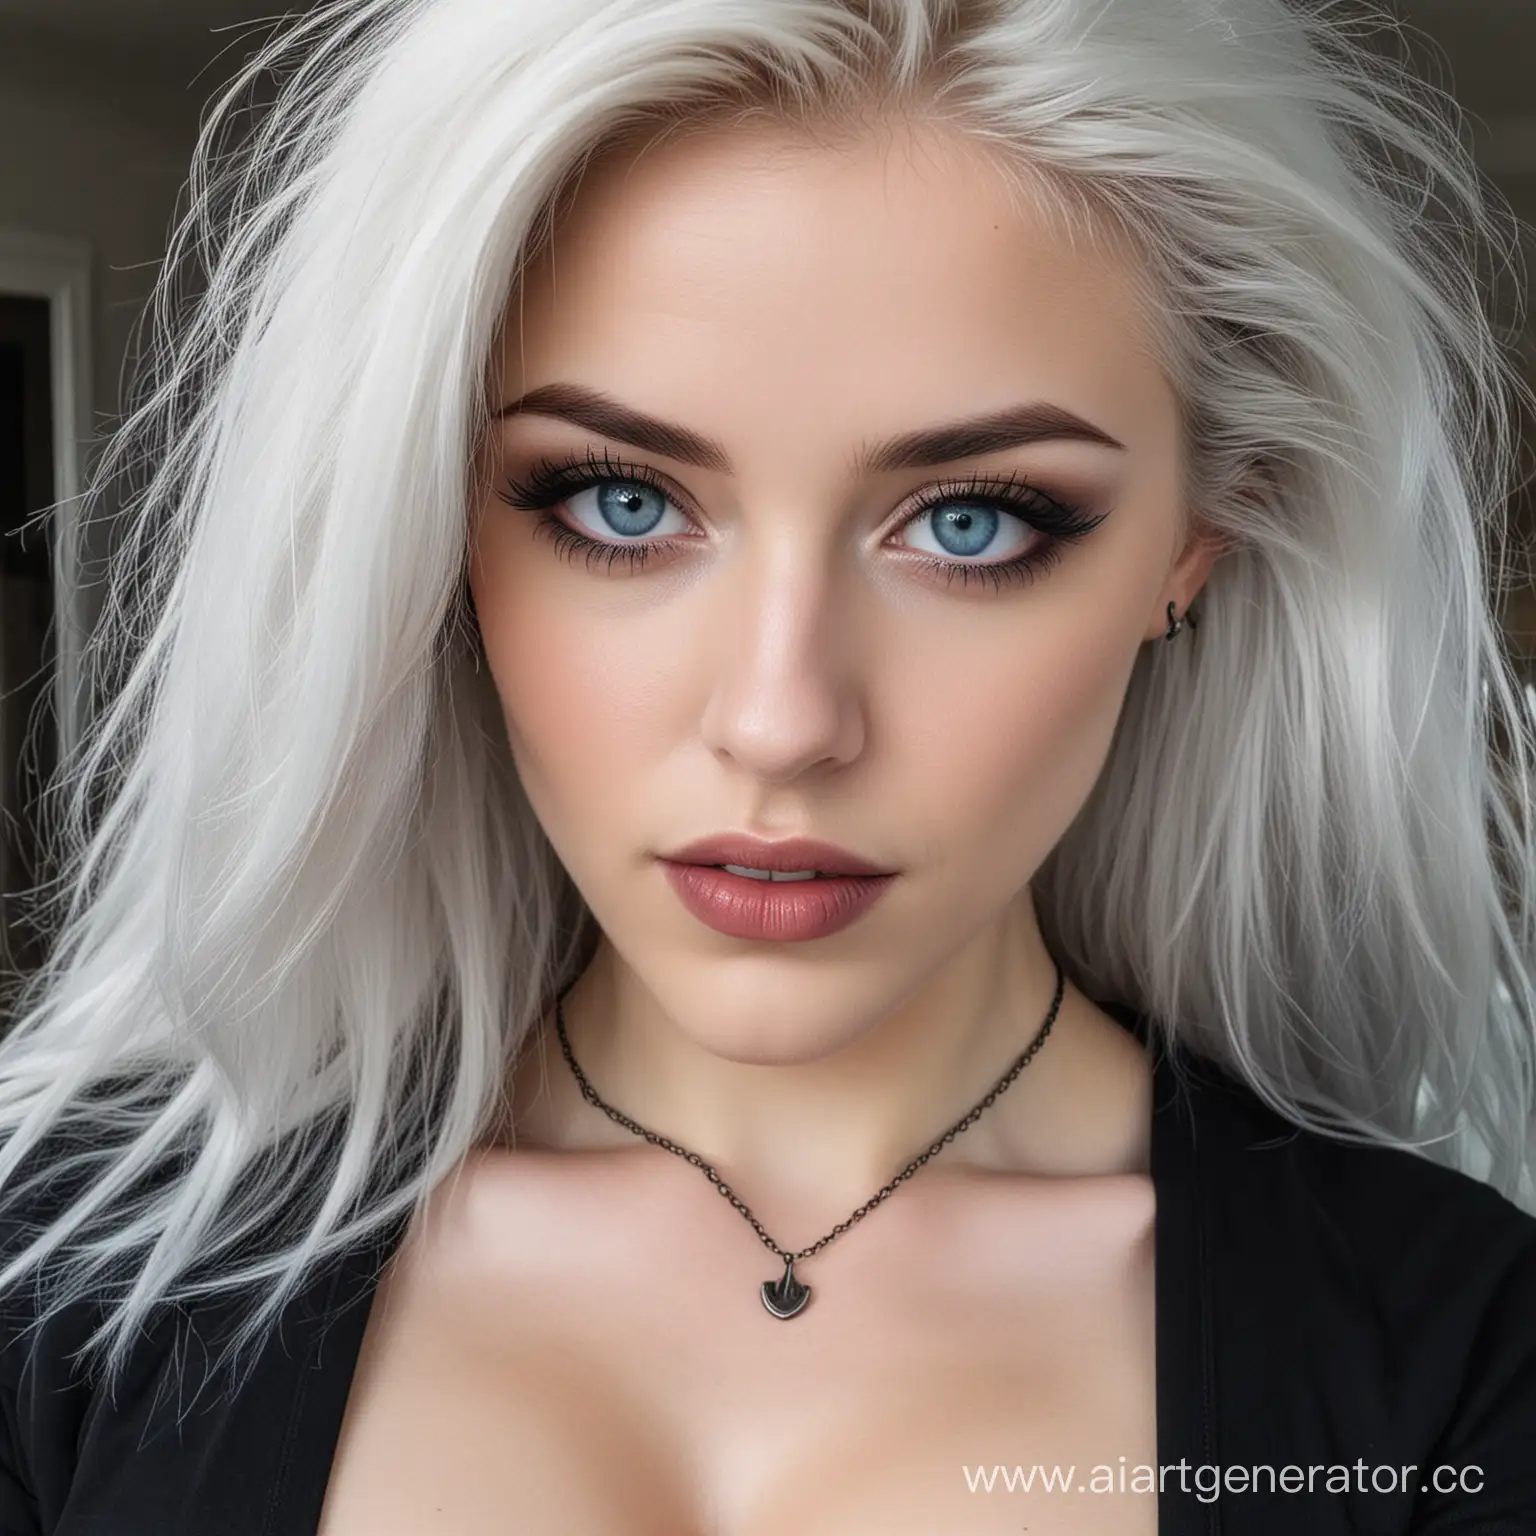 SEXY CUTE GOTH WHITE WOMAN BLUE EYES WELL DEFINED JAWLINE AND BIG BOOBS